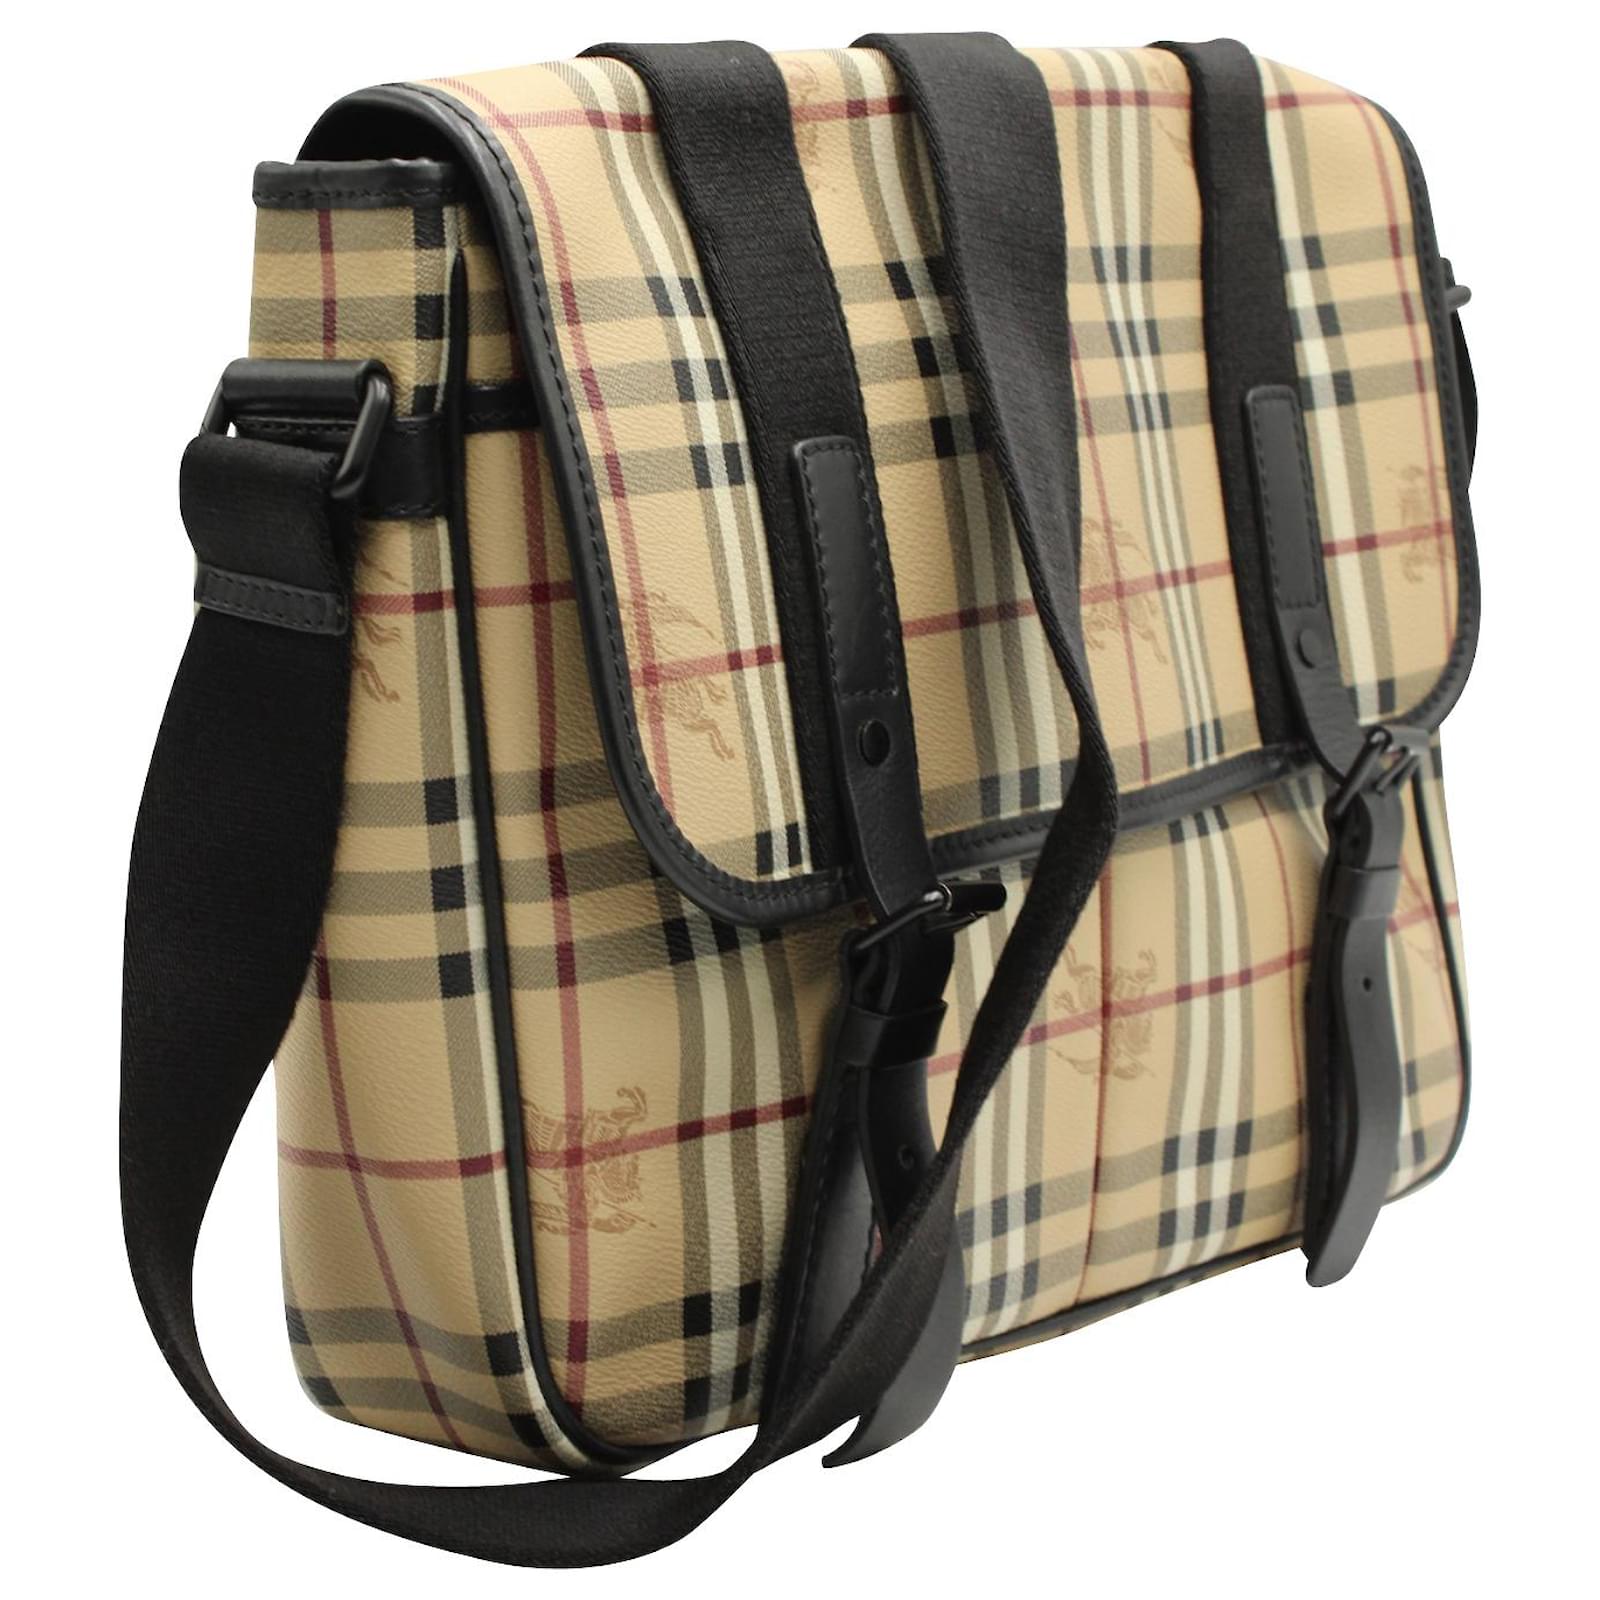 BURBERRY Leather-Trimmed Checked Coated-Canvas Messenger Bag for Men